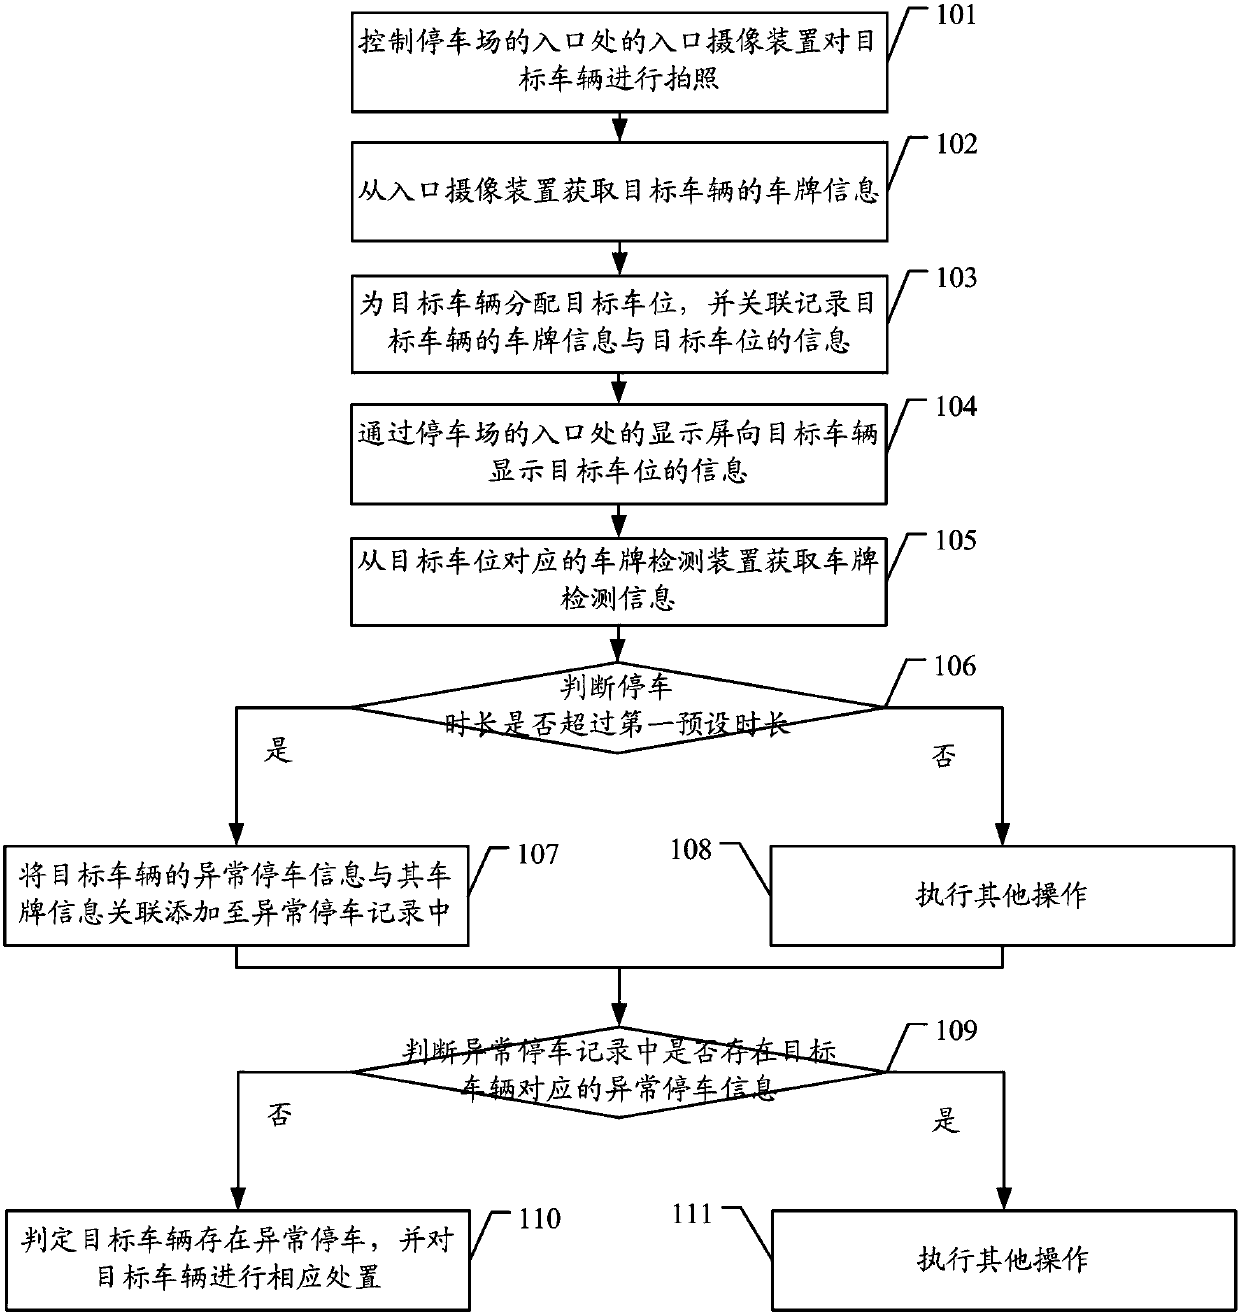 Parking information processing method and device thereof, computer device and readable storage medium